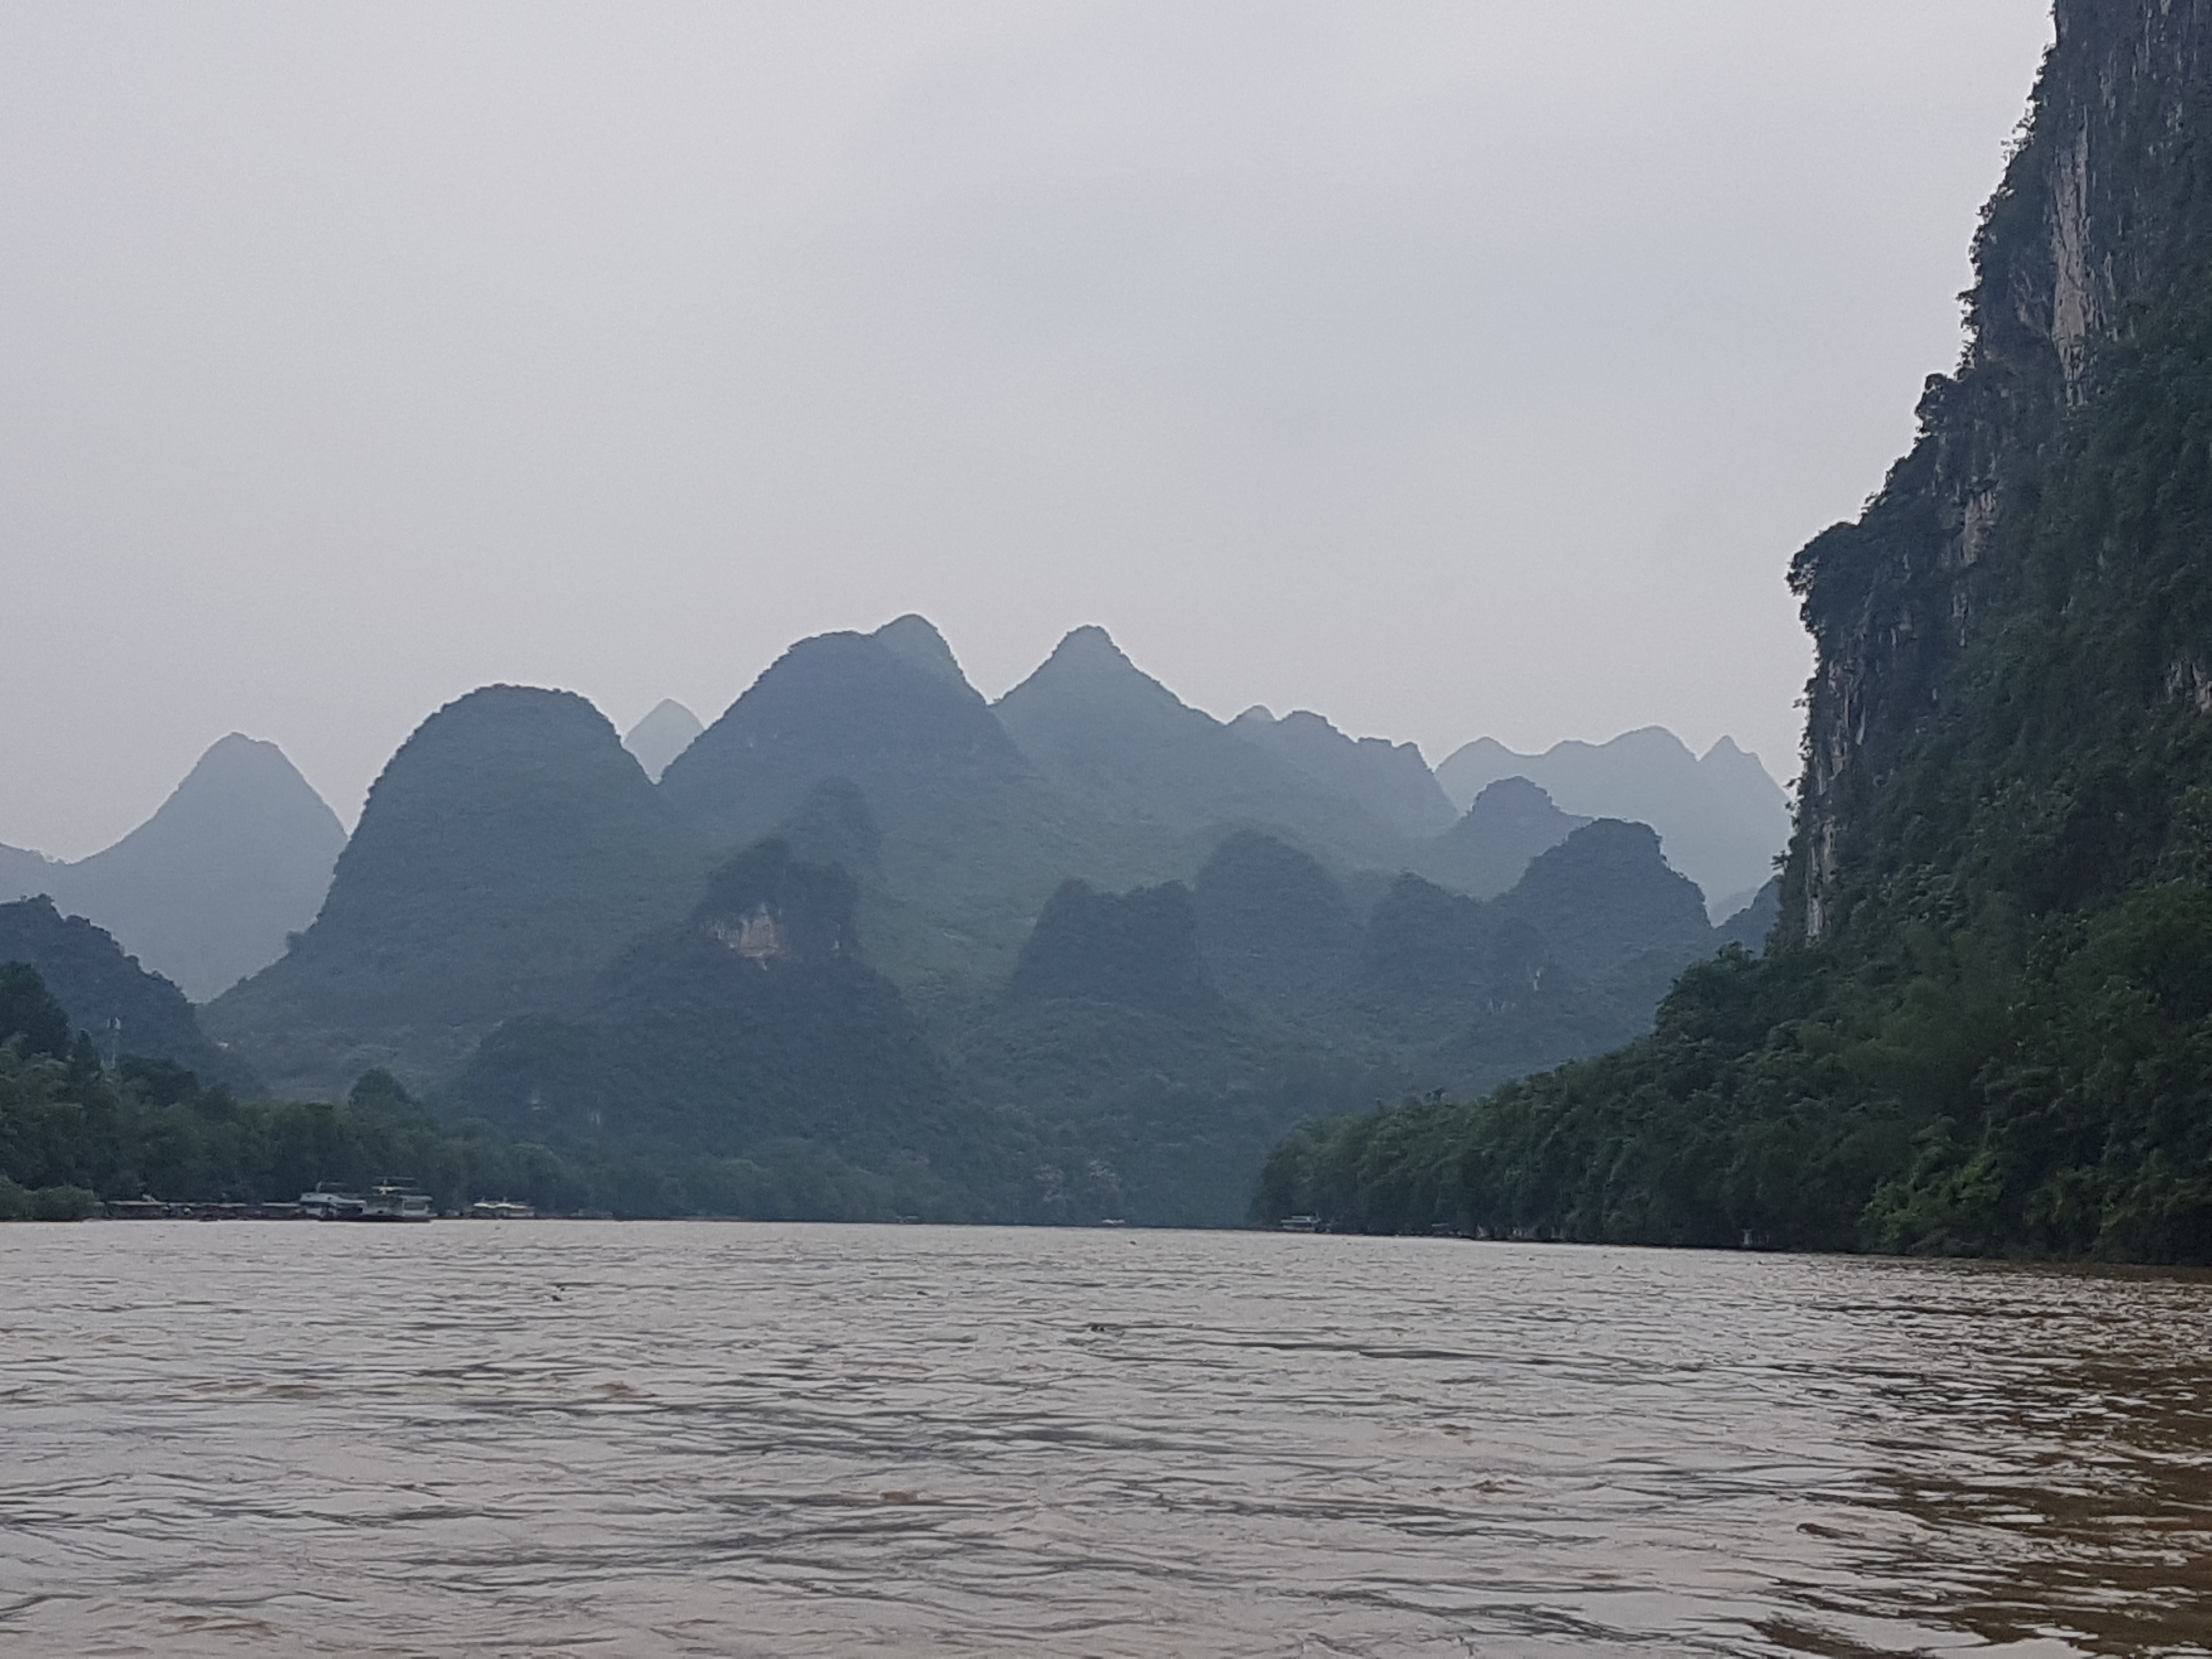 Outside of Guilin, China